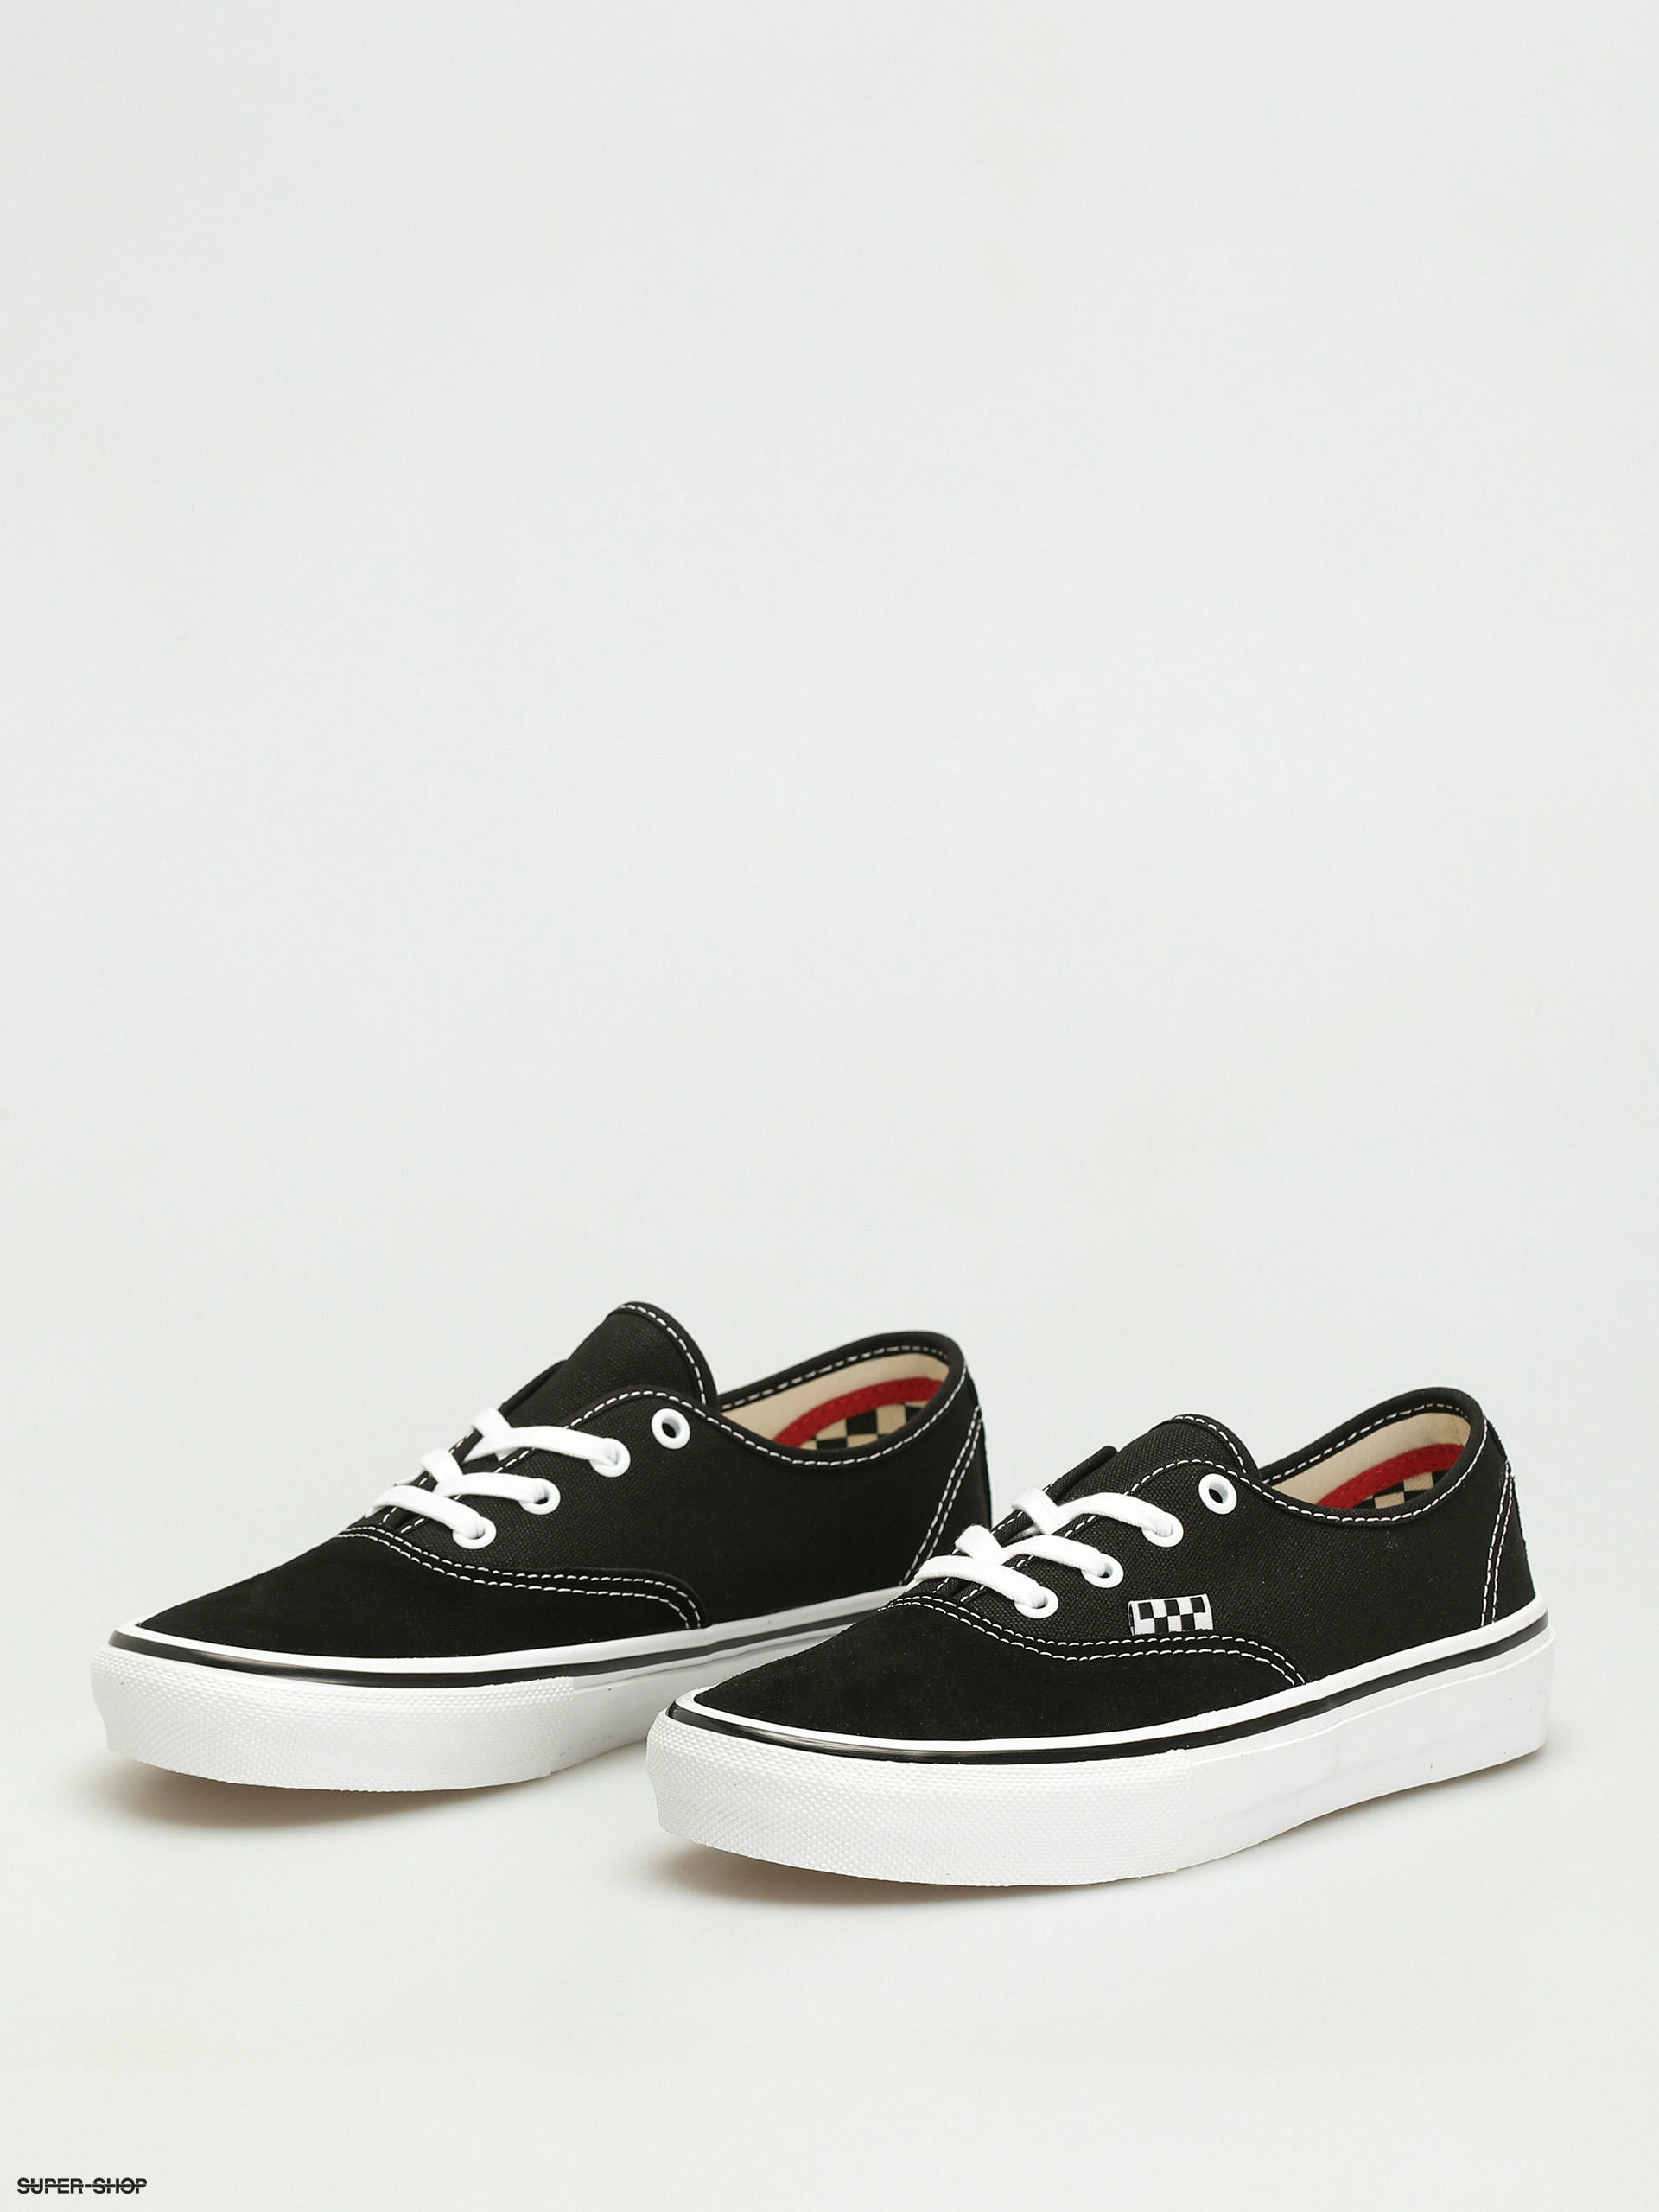 Vans Authentic Black and White Canvas Skate Shoes